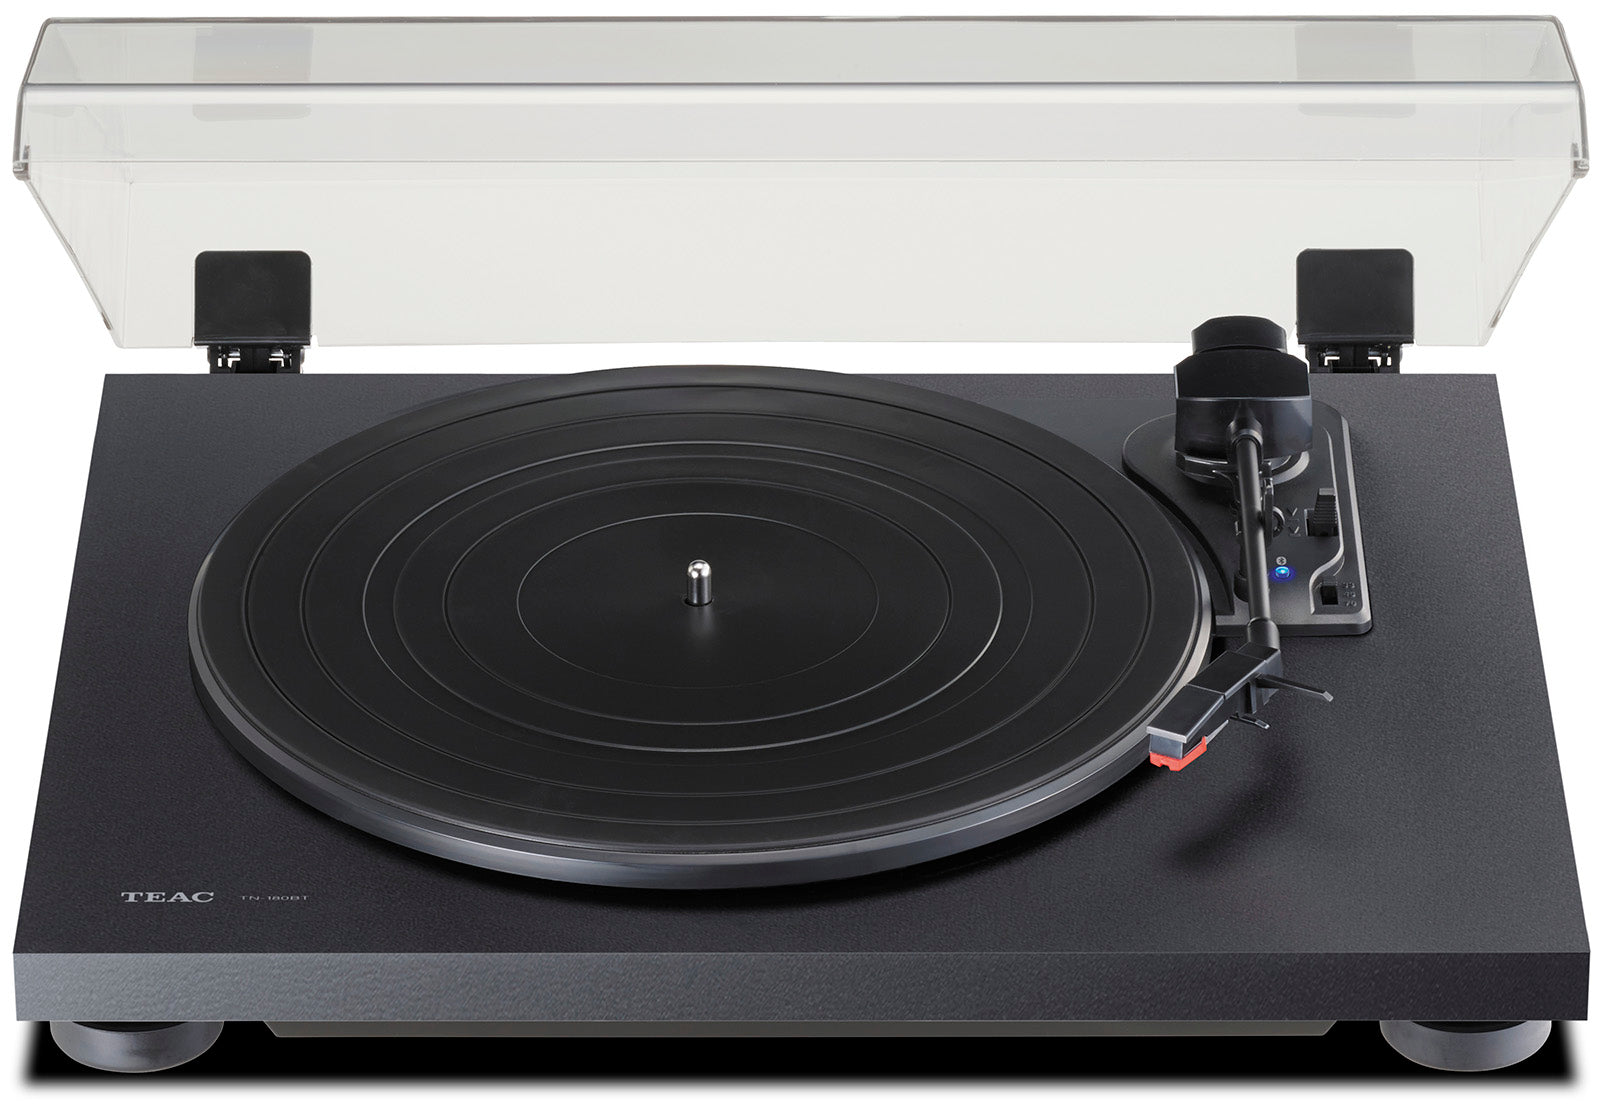 TEAC TN-180BT-A3 BLUETOOTH Analog TURNTABLE for vinyl playback 3-speed Built-in Phono amp